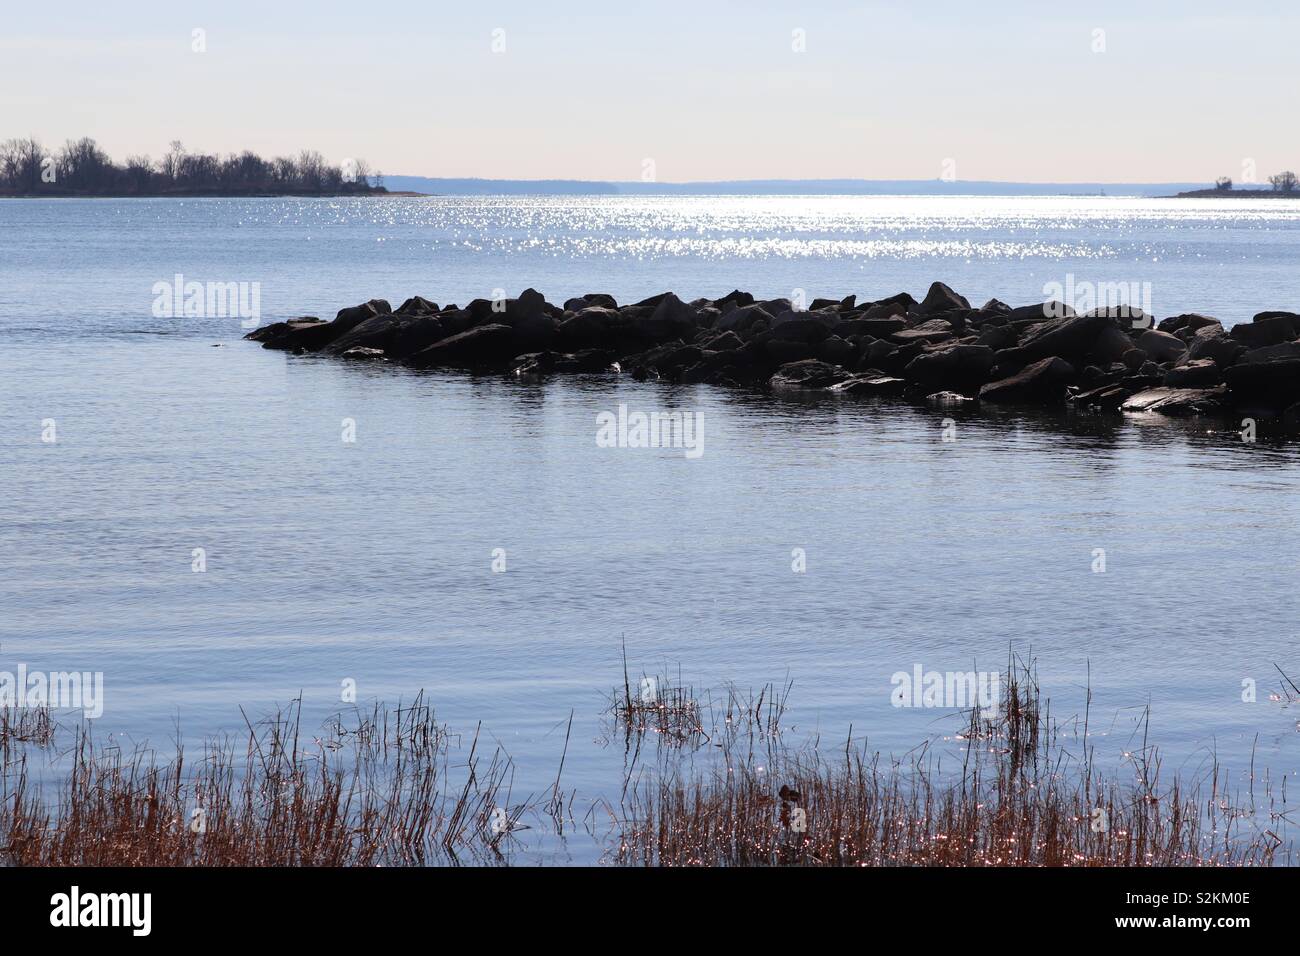 Outcrop of rocks overlooking Long Island Sound Stock Photo